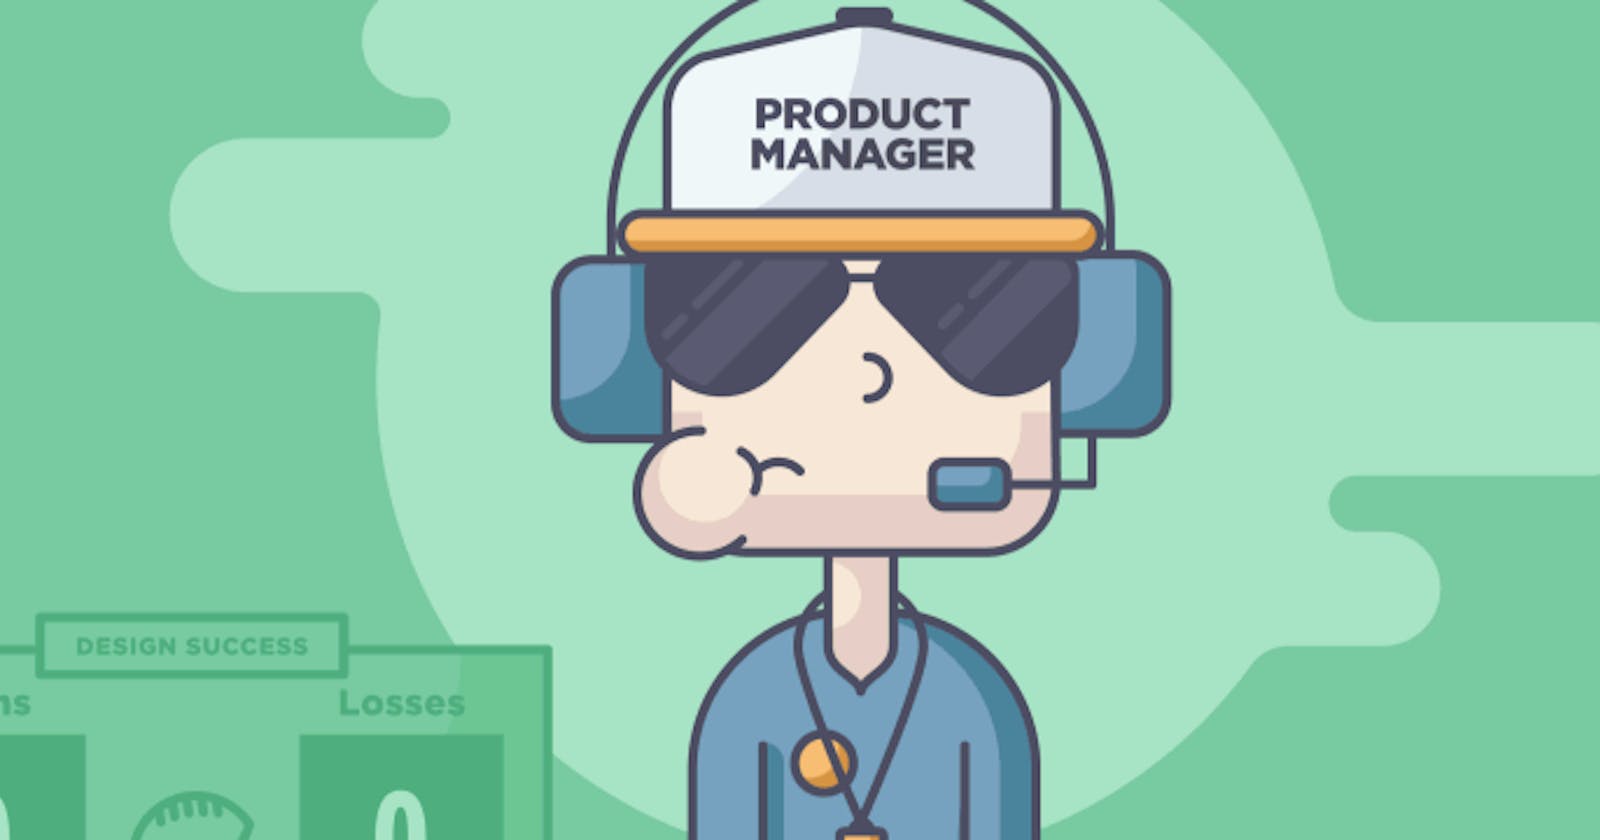 Product Manager | Potential Interactions